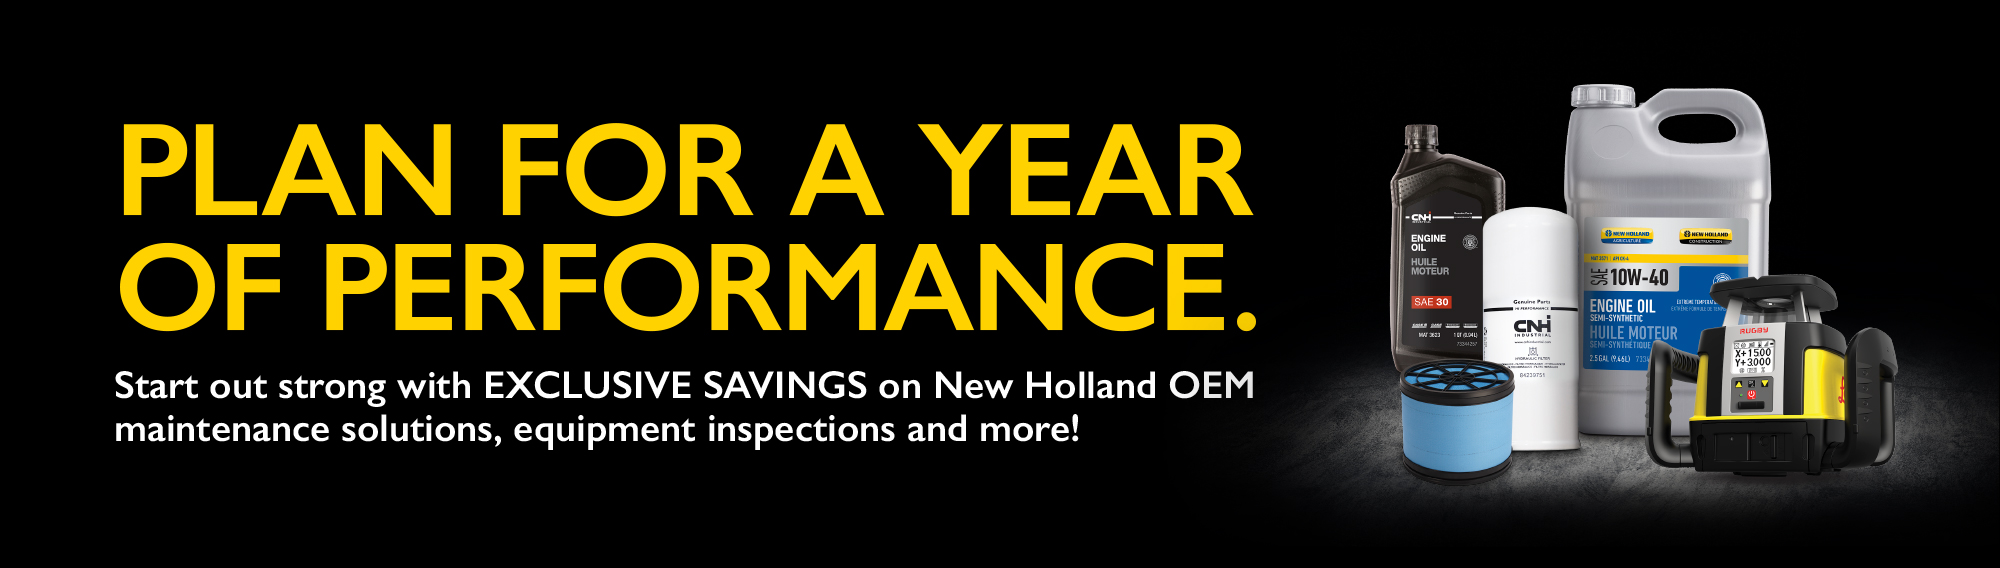 Plan for a year of performance. Start out strong with EXCLUSIVE SAVINGS on Hew Holland OEM maintenance solutions, equipment inspections and more!